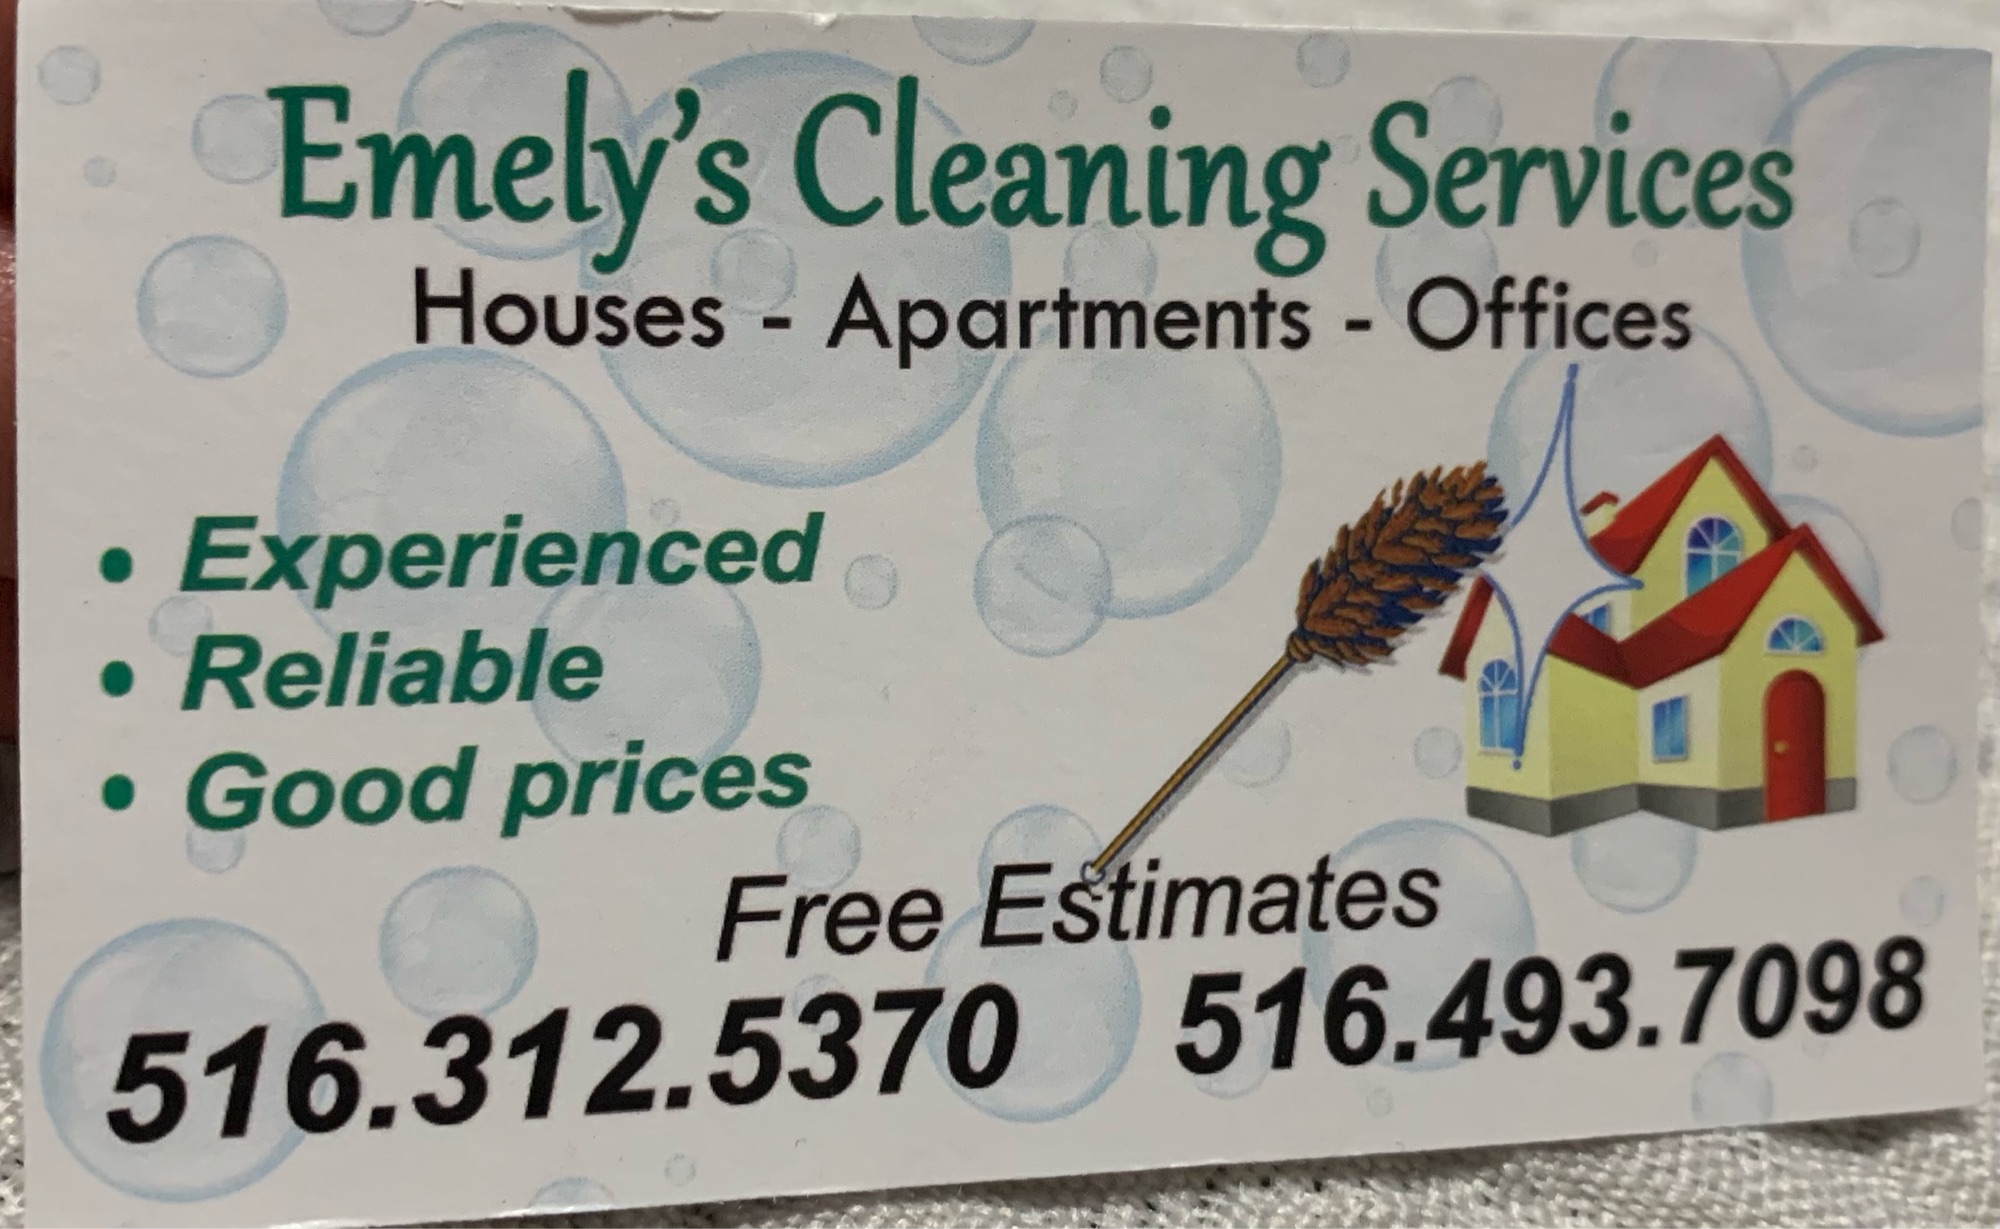 Emely's Cleaning Services Logo